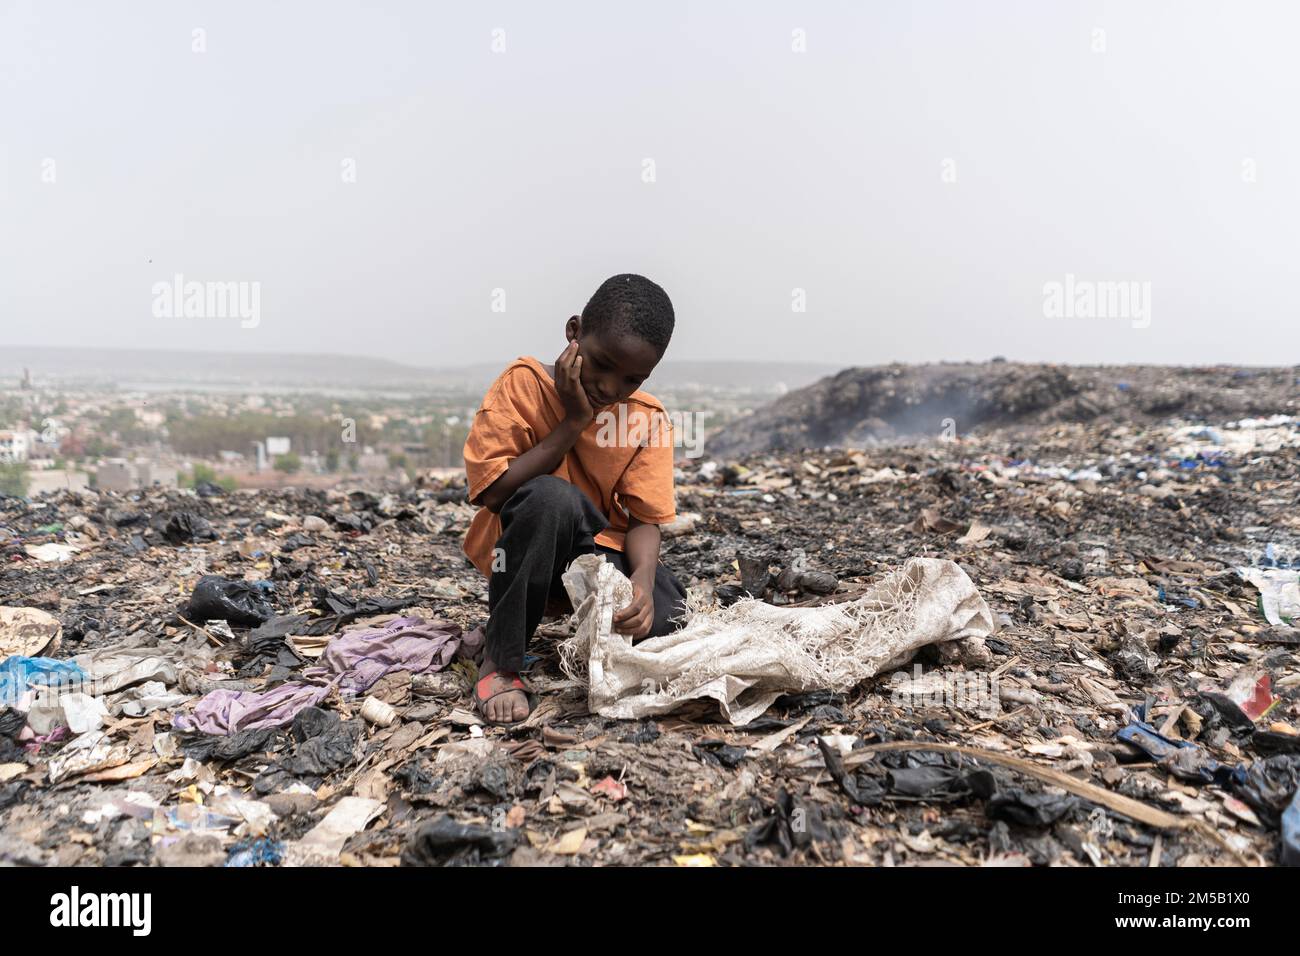 Miserable hungry African slum child looking for edible and recyclable items in a huge urban garbage dump Stock Photo